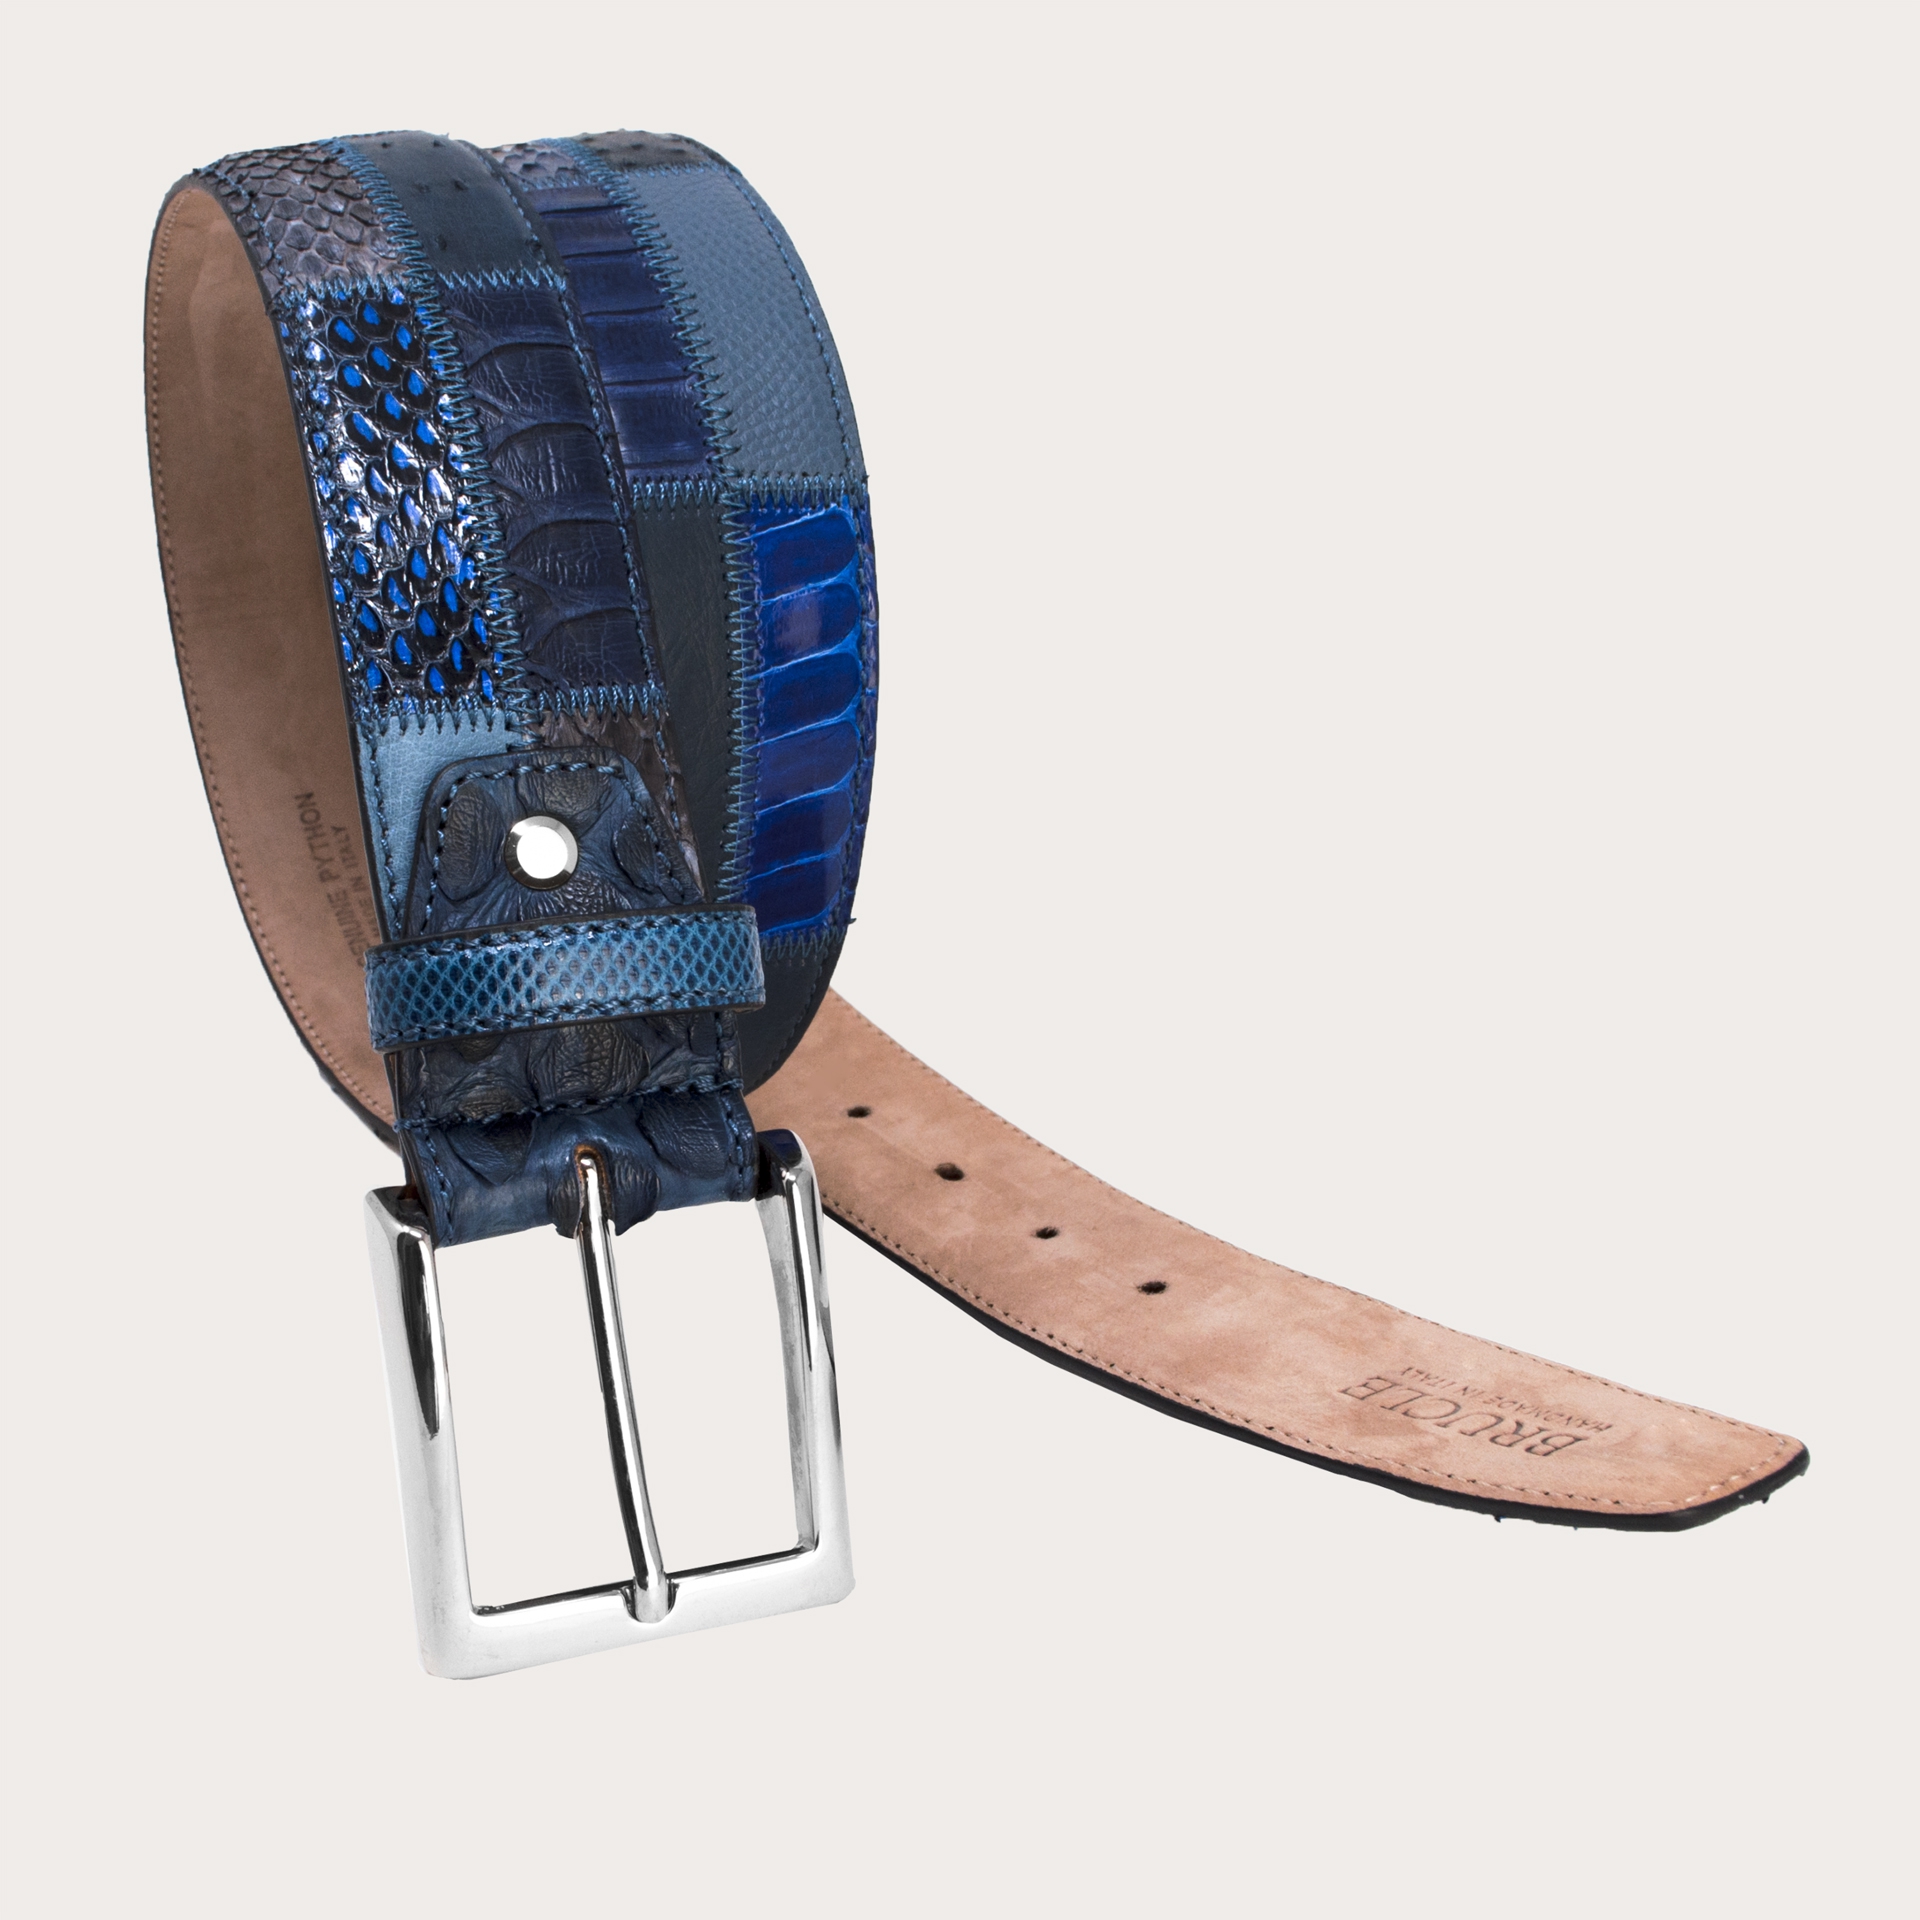 Genuine python belt handmade in Italy with patchwork workmanship. A unique piece that does not go unnoticed.